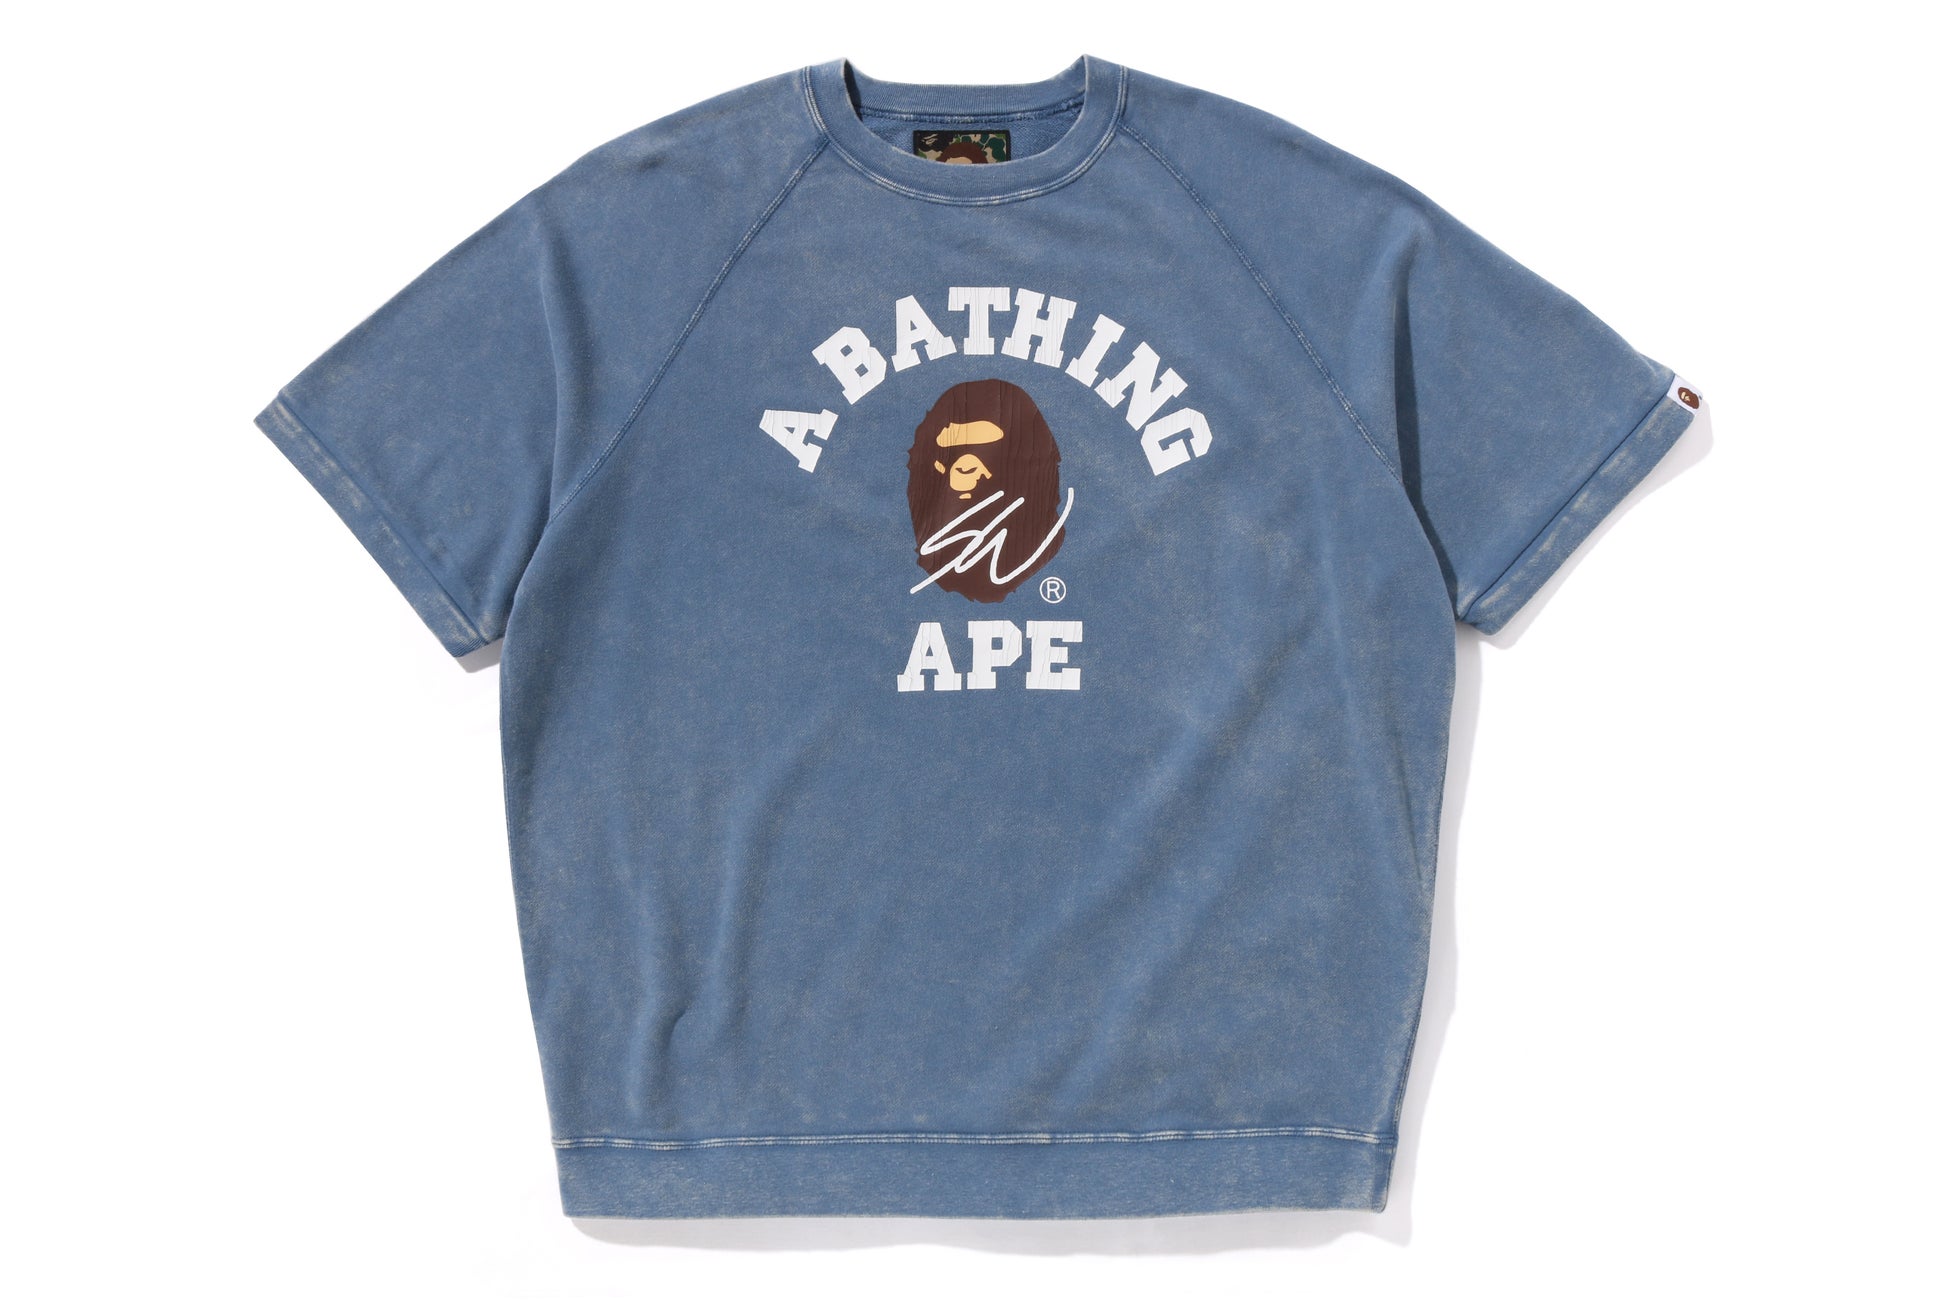 A BATHING APE®️ x Sean Wotherspoon